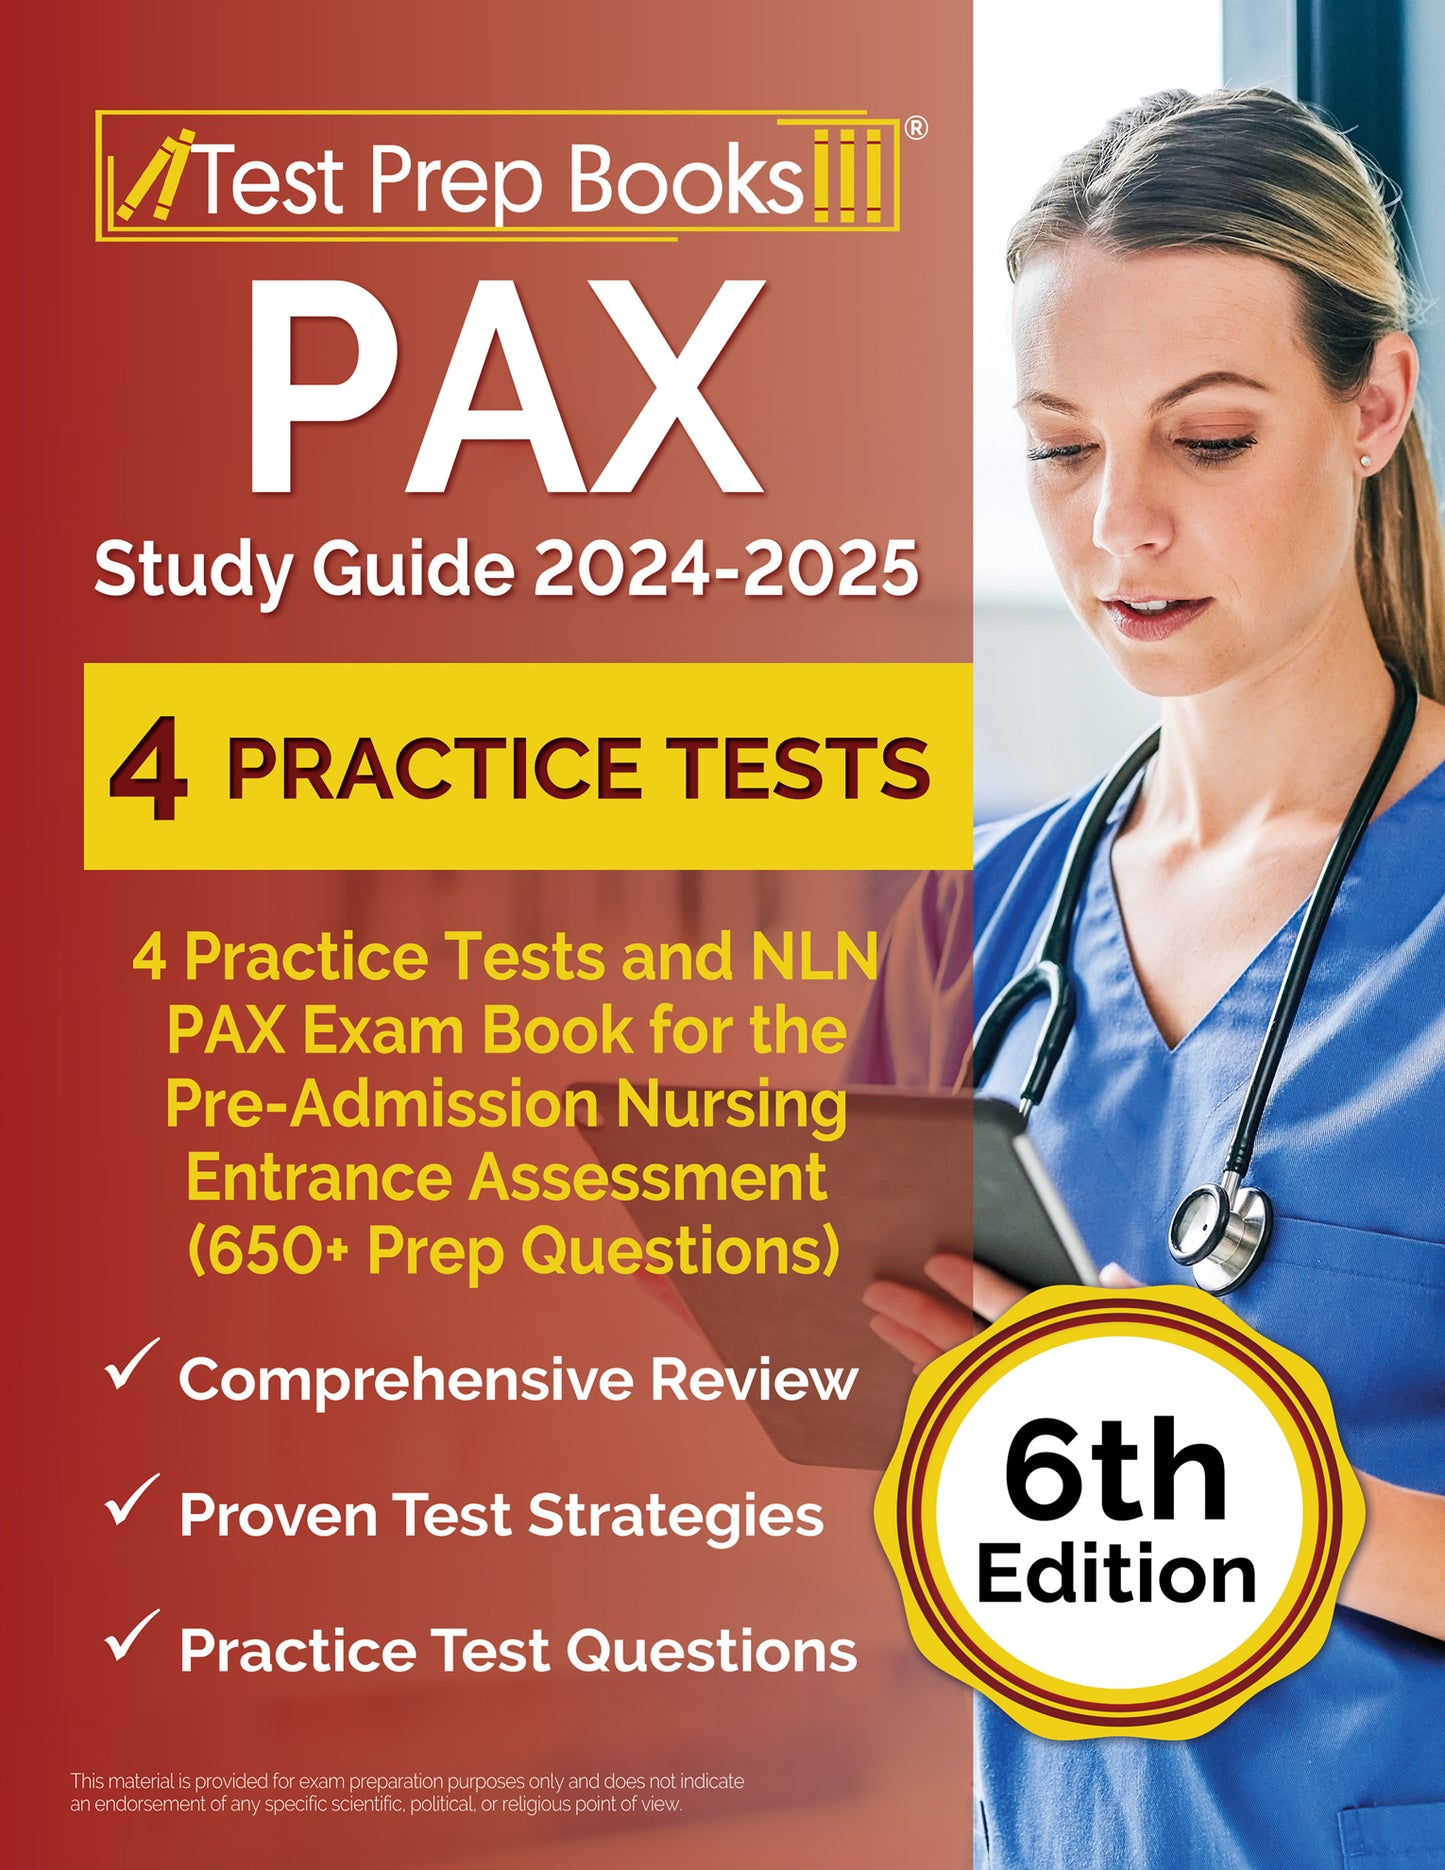 PAX Study Guide 2024-2025: 4 Practice Tests and NLN PAX Exam Book for the Pre-Admission Nursing Entrance Assessment (650+ Prep Questions) [6th Edition]